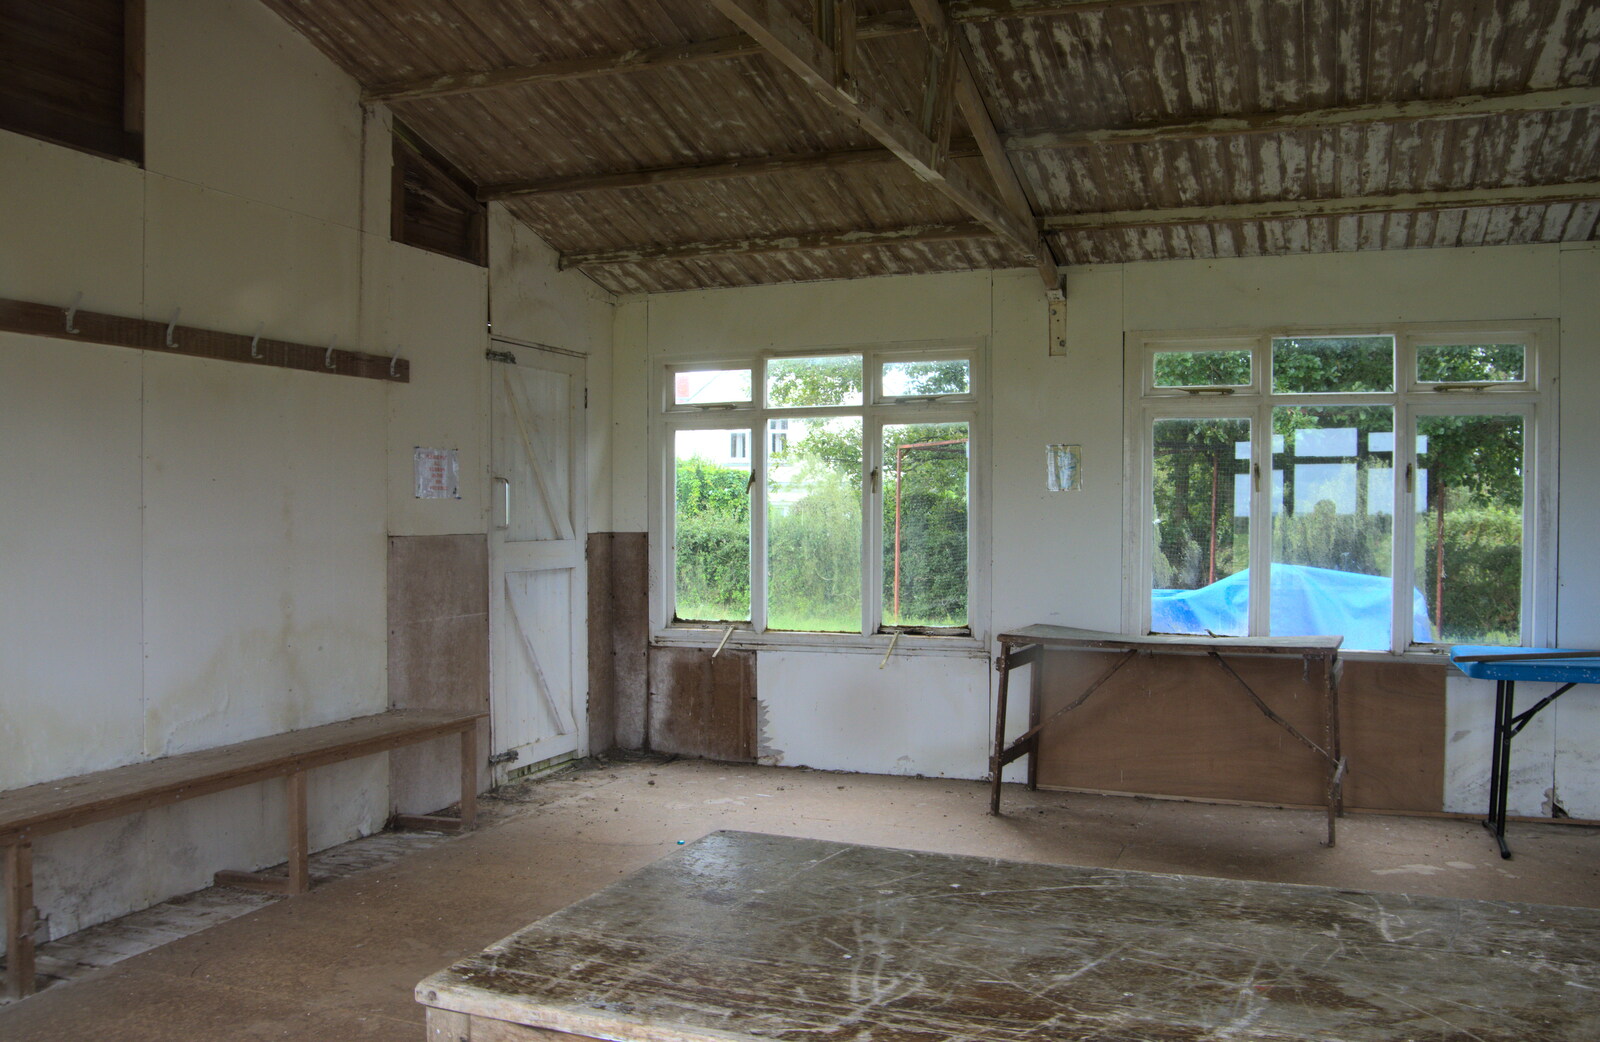 Inside the almost-derelict pavillion from A Game of Cricket, and a Walk Around Chagford, Devon - 23rd August 2020